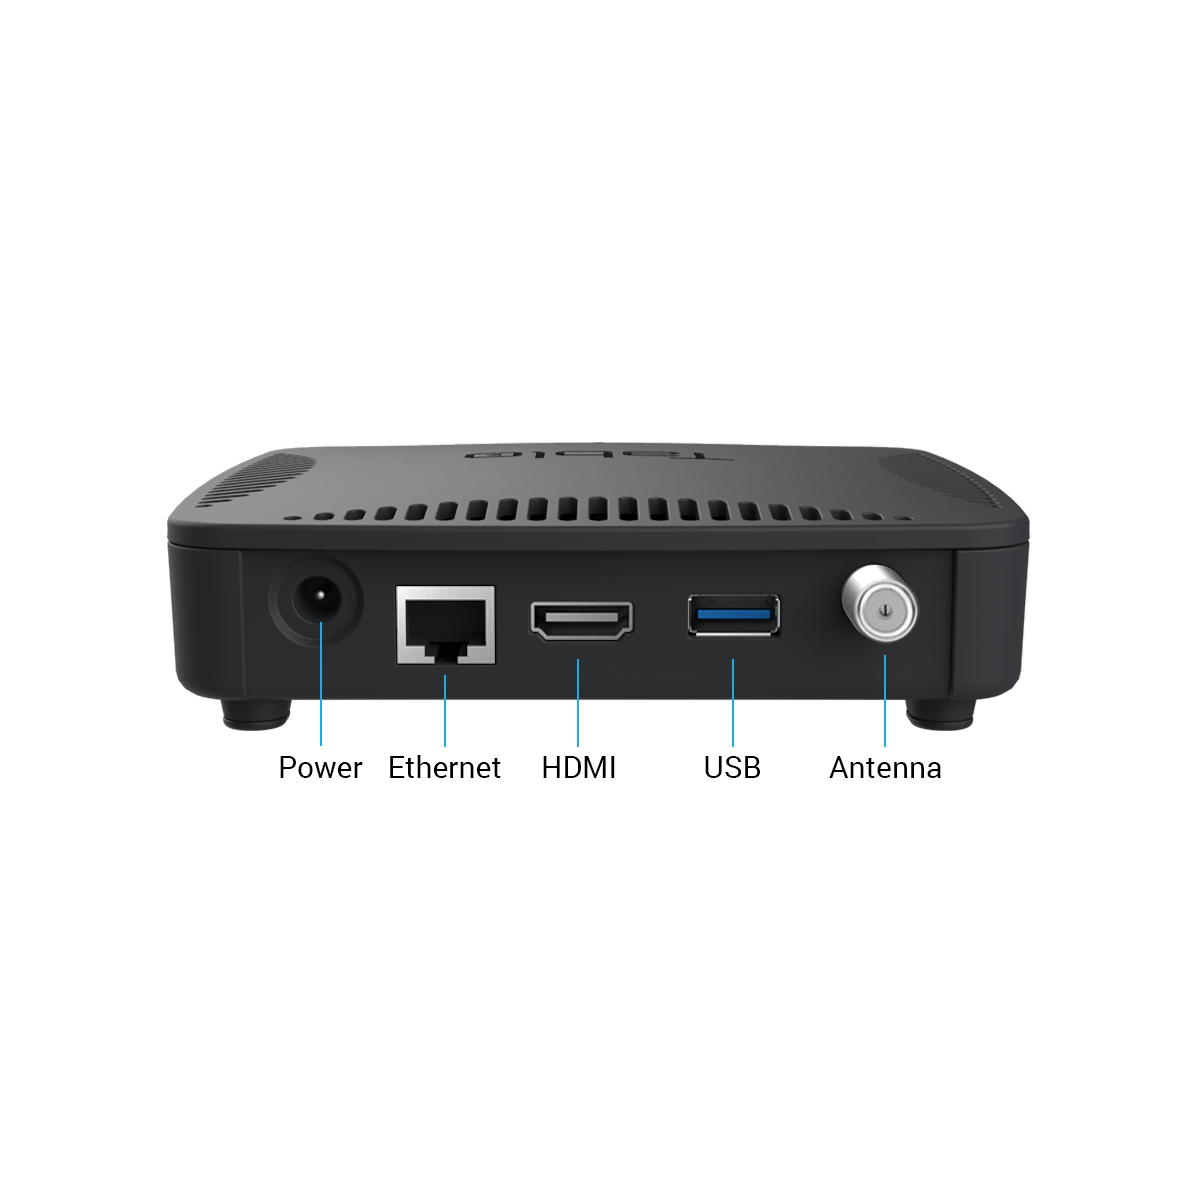 Tablo DUAL HDMI Over-The-Air (OTA) DVR (Digital Video Recorder) for Cord Cutters. DVR hardware rear view with inputs labelled.